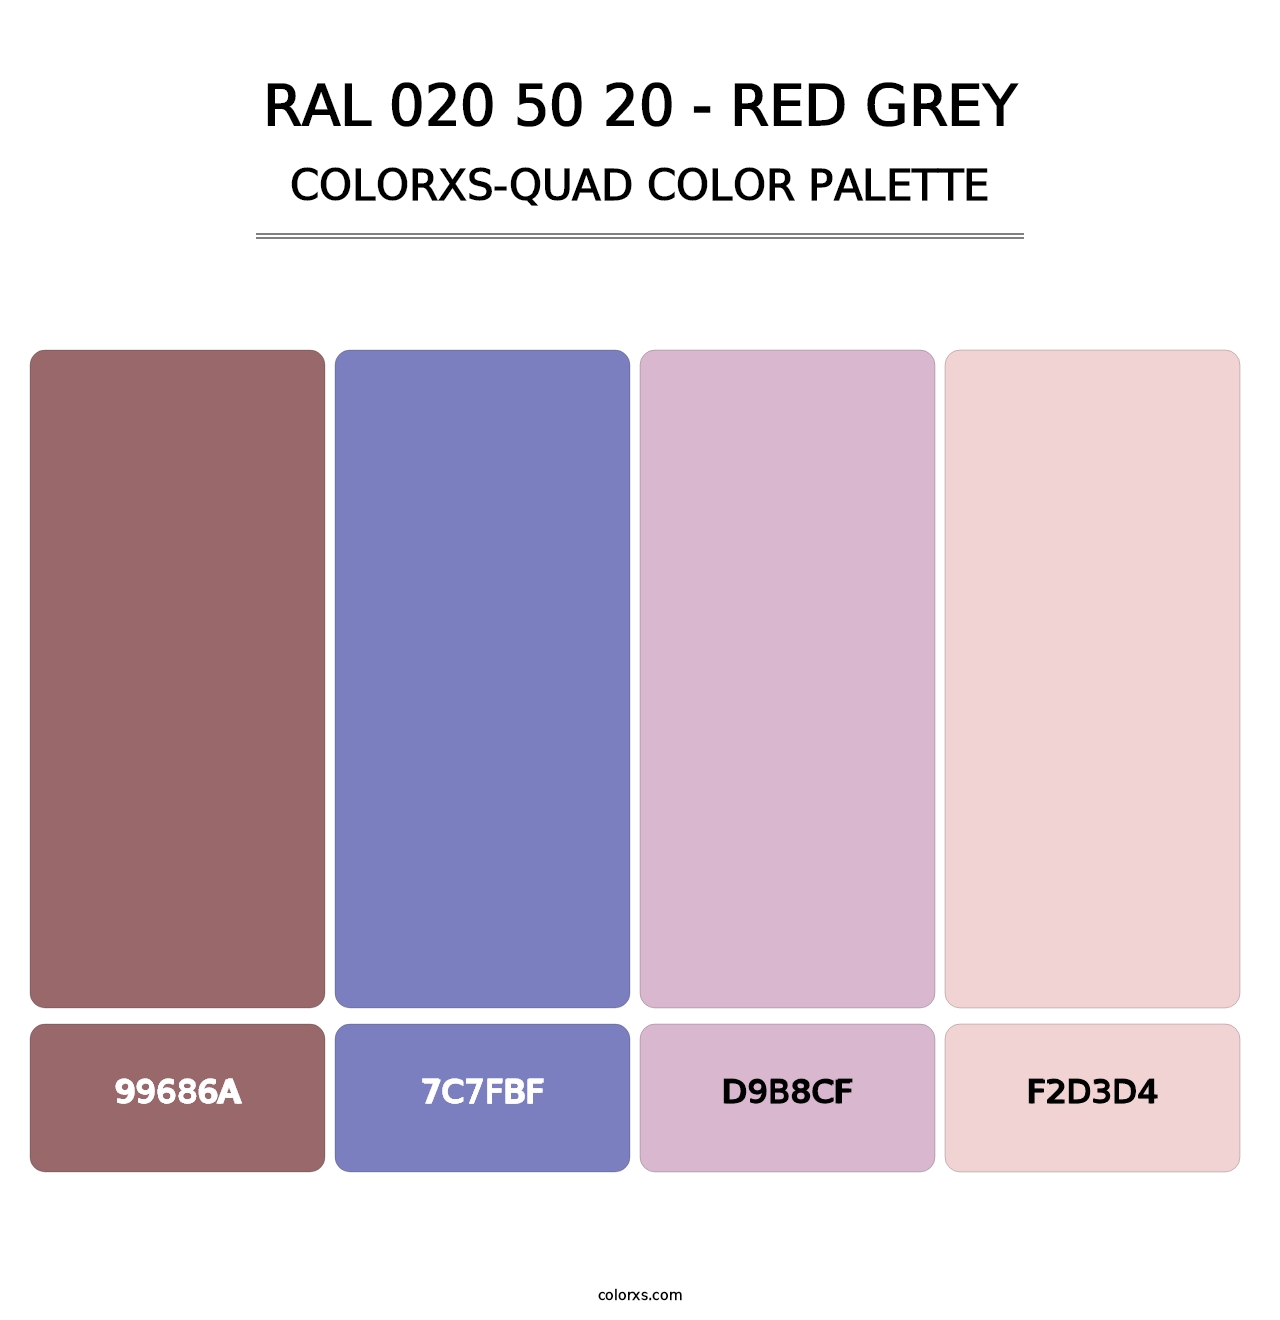 RAL 020 50 20 - Red Grey - Colorxs Quad Palette